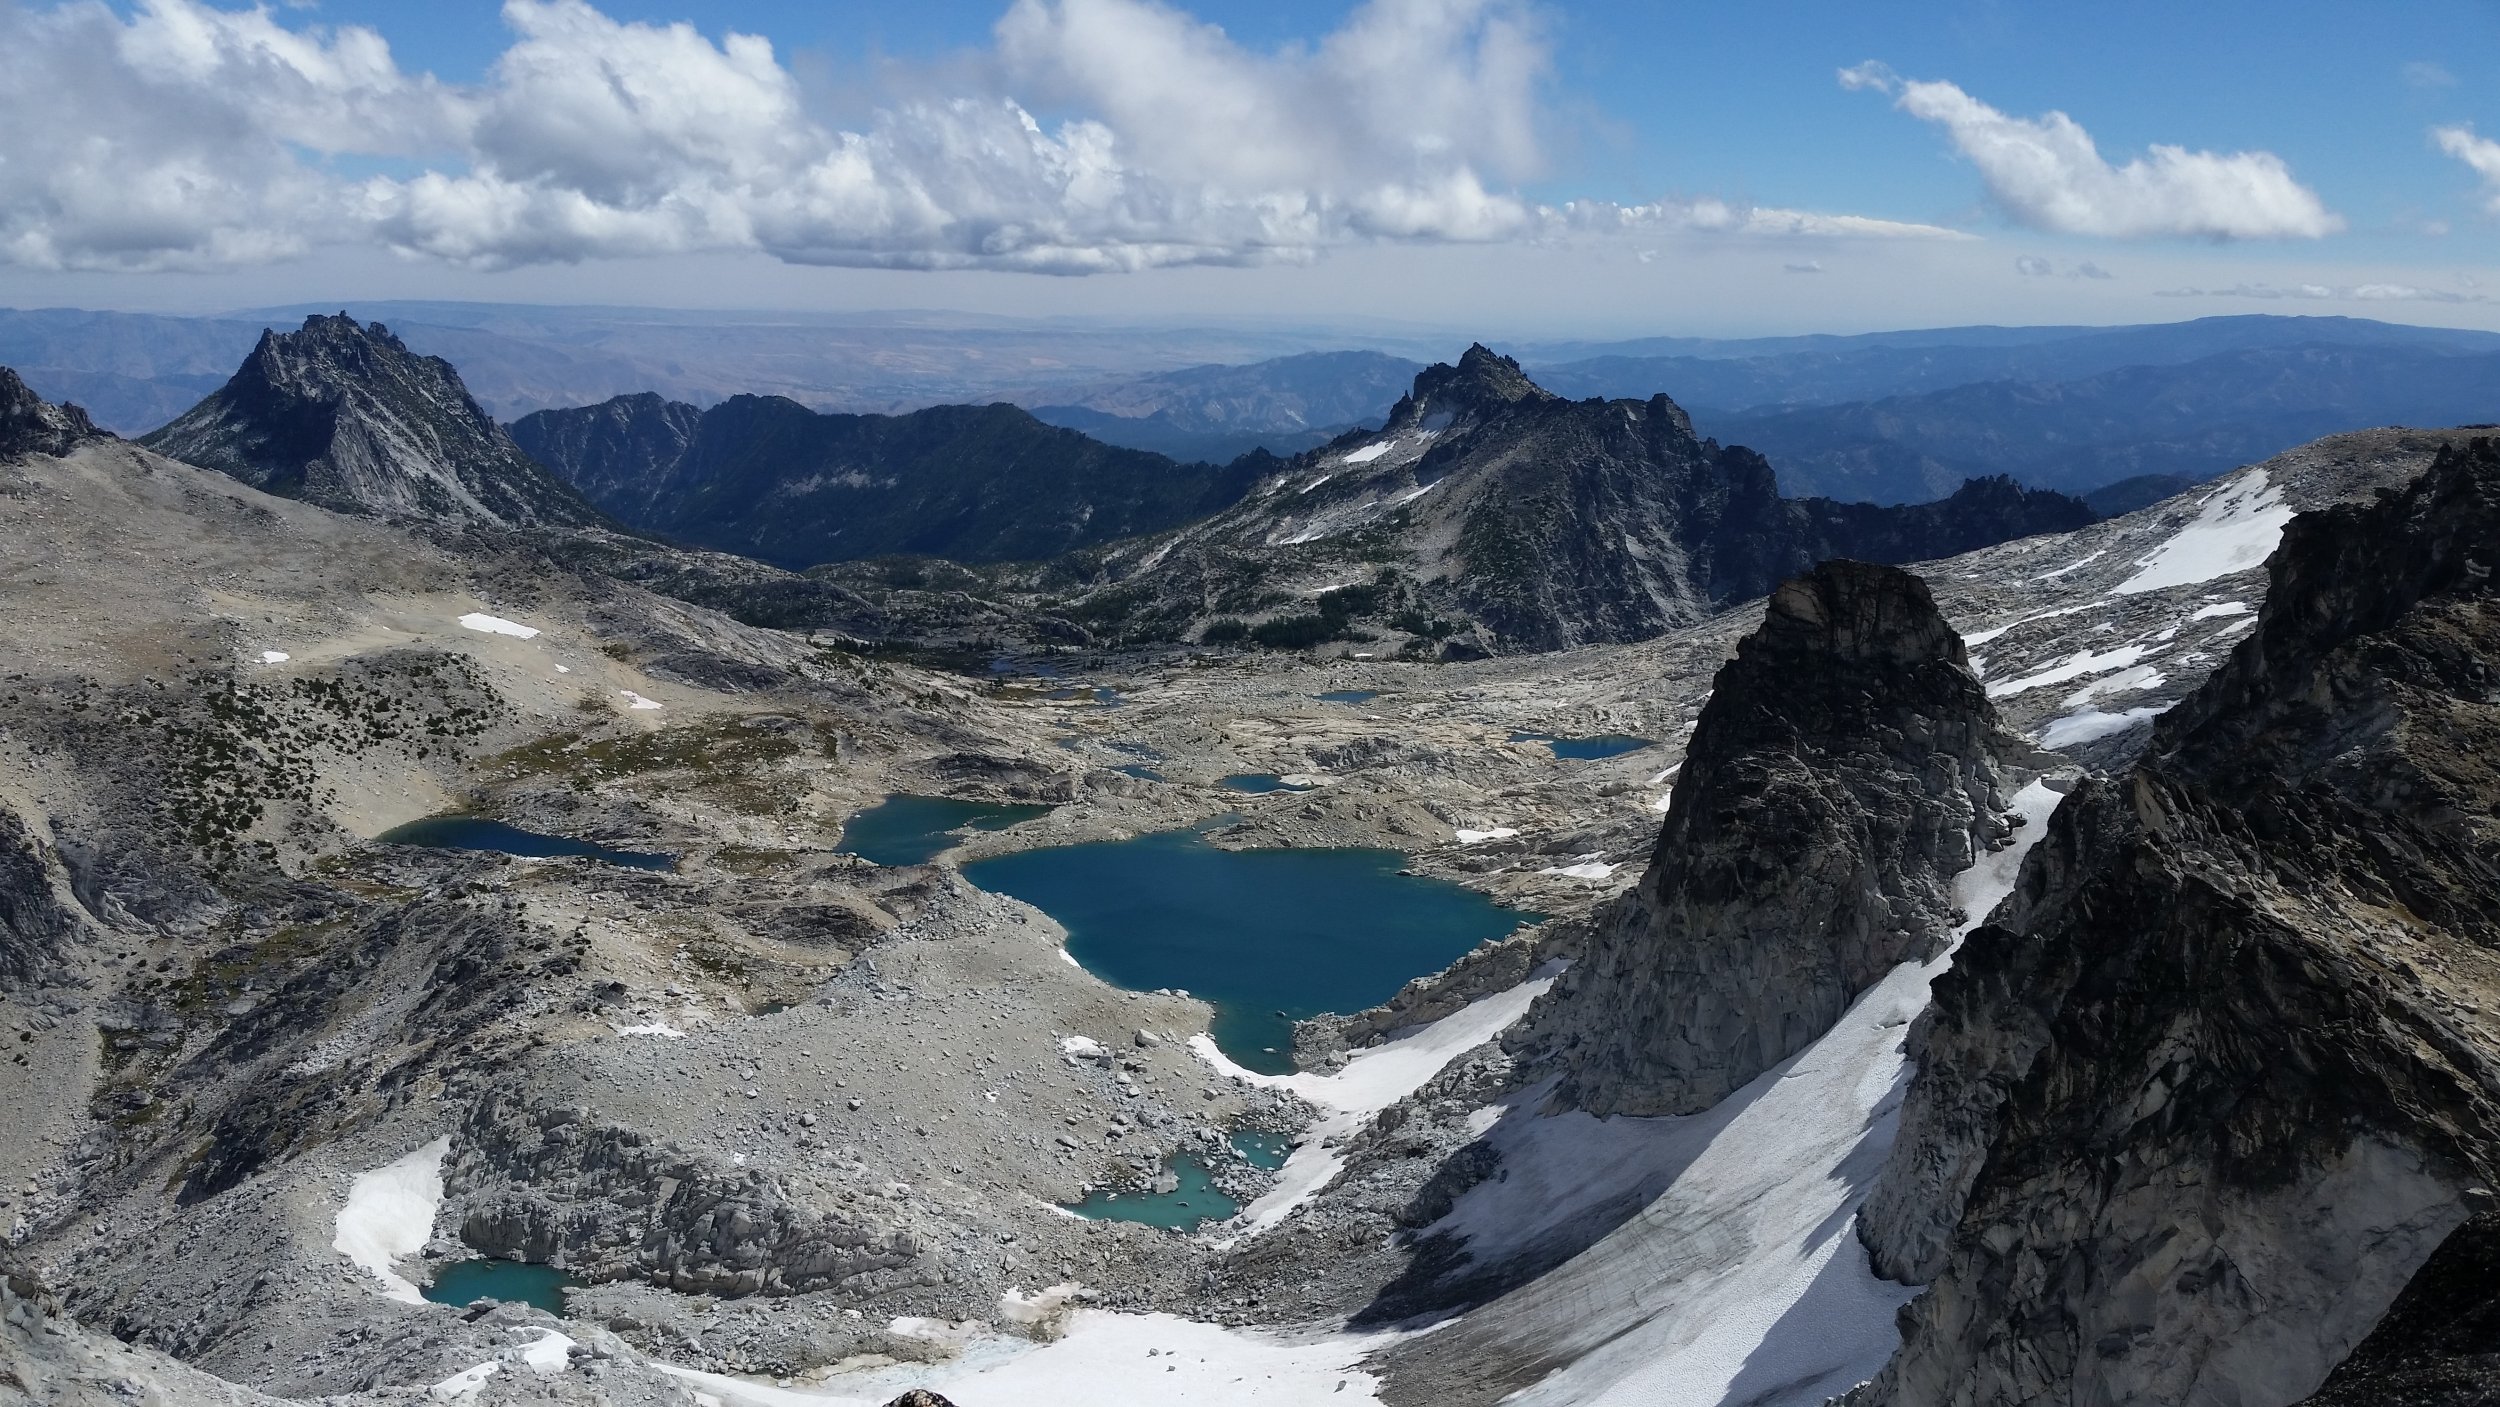 Summit of Dragontail Peak.  Looking toward the upper Enchantments.